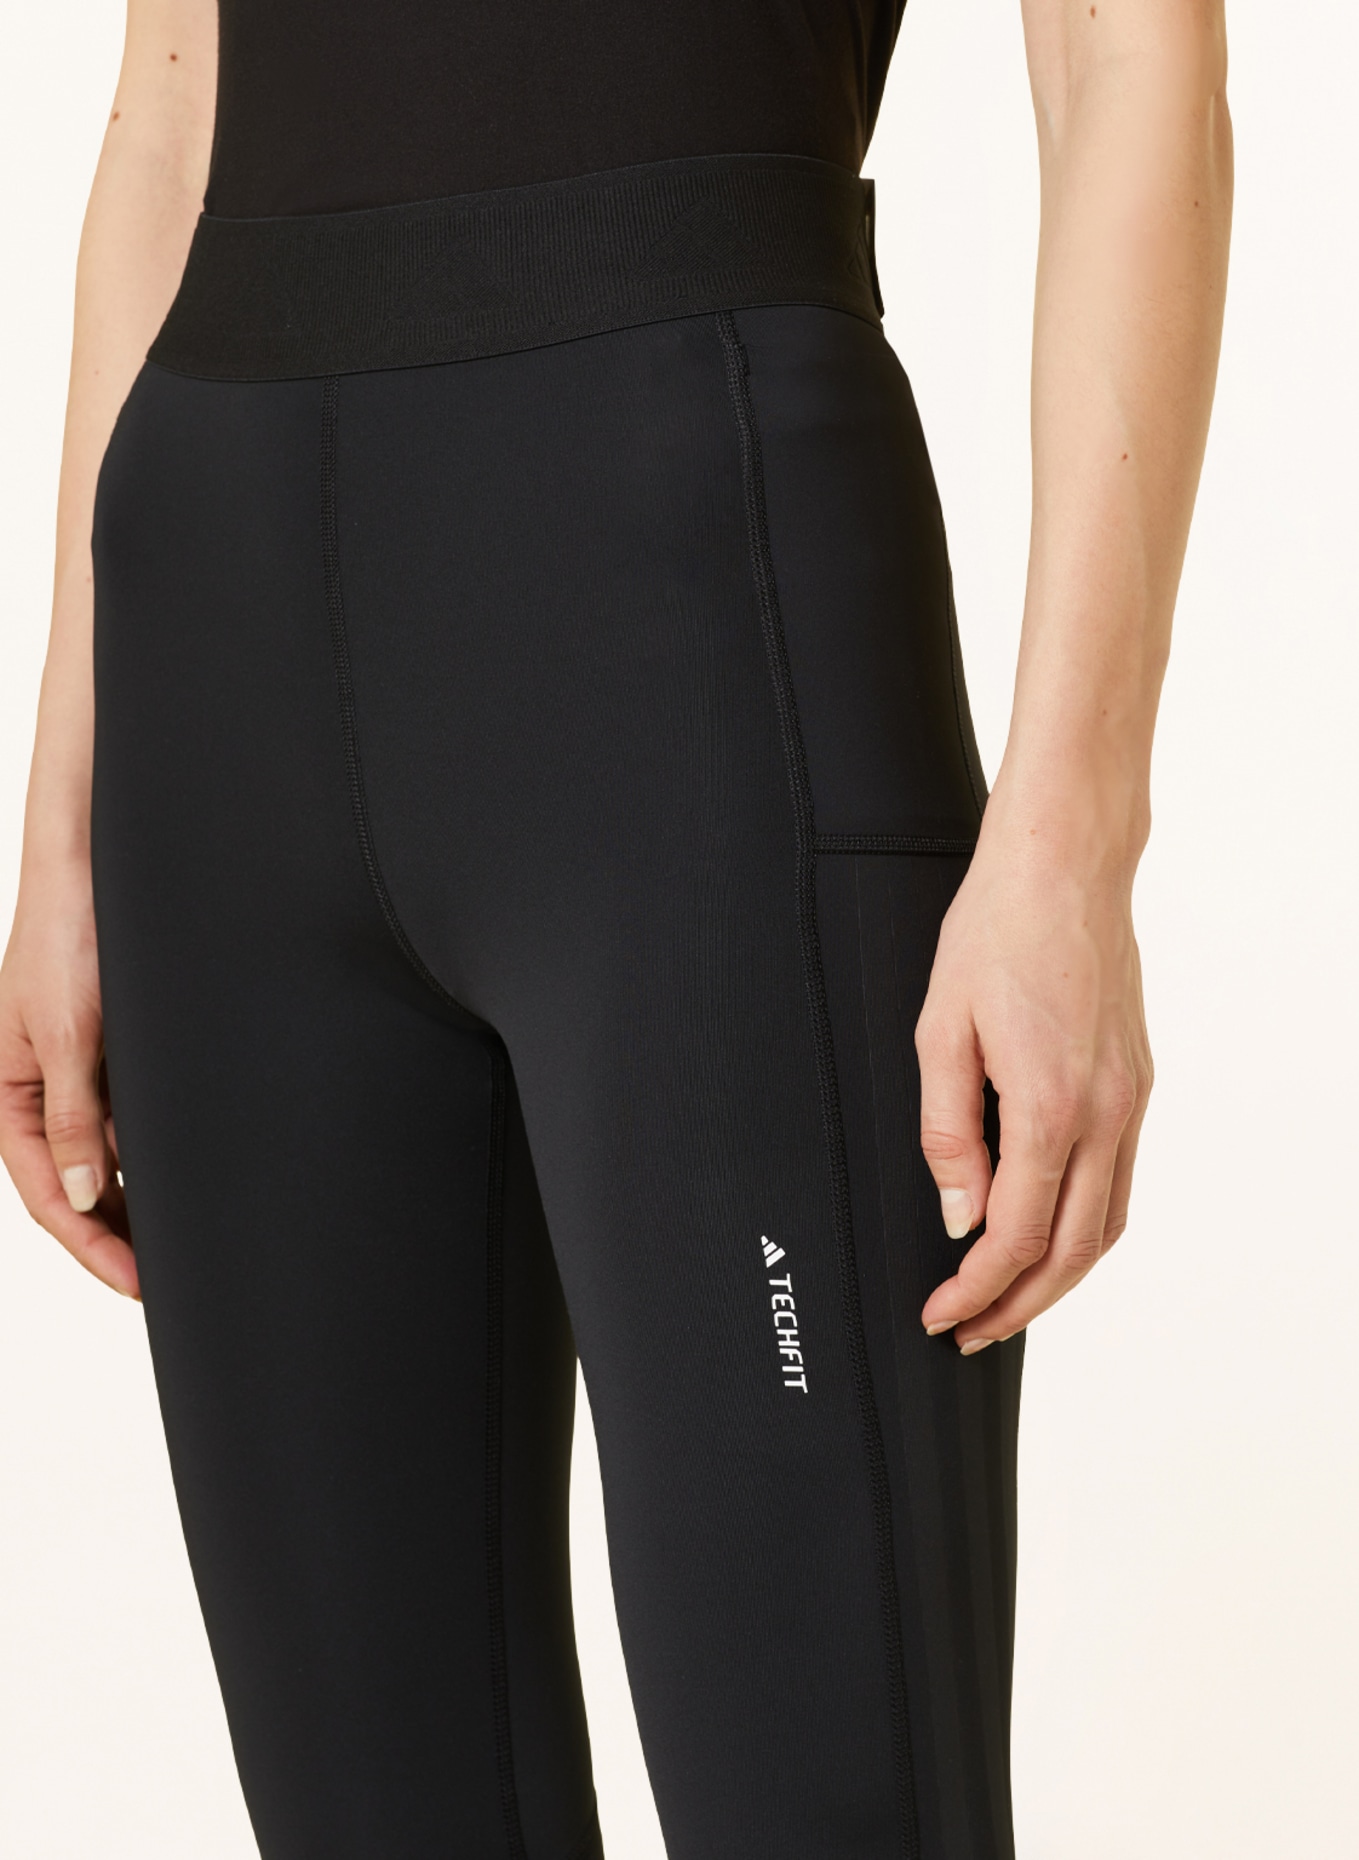 adidas Tights TECHFIT COLD.DRY in black